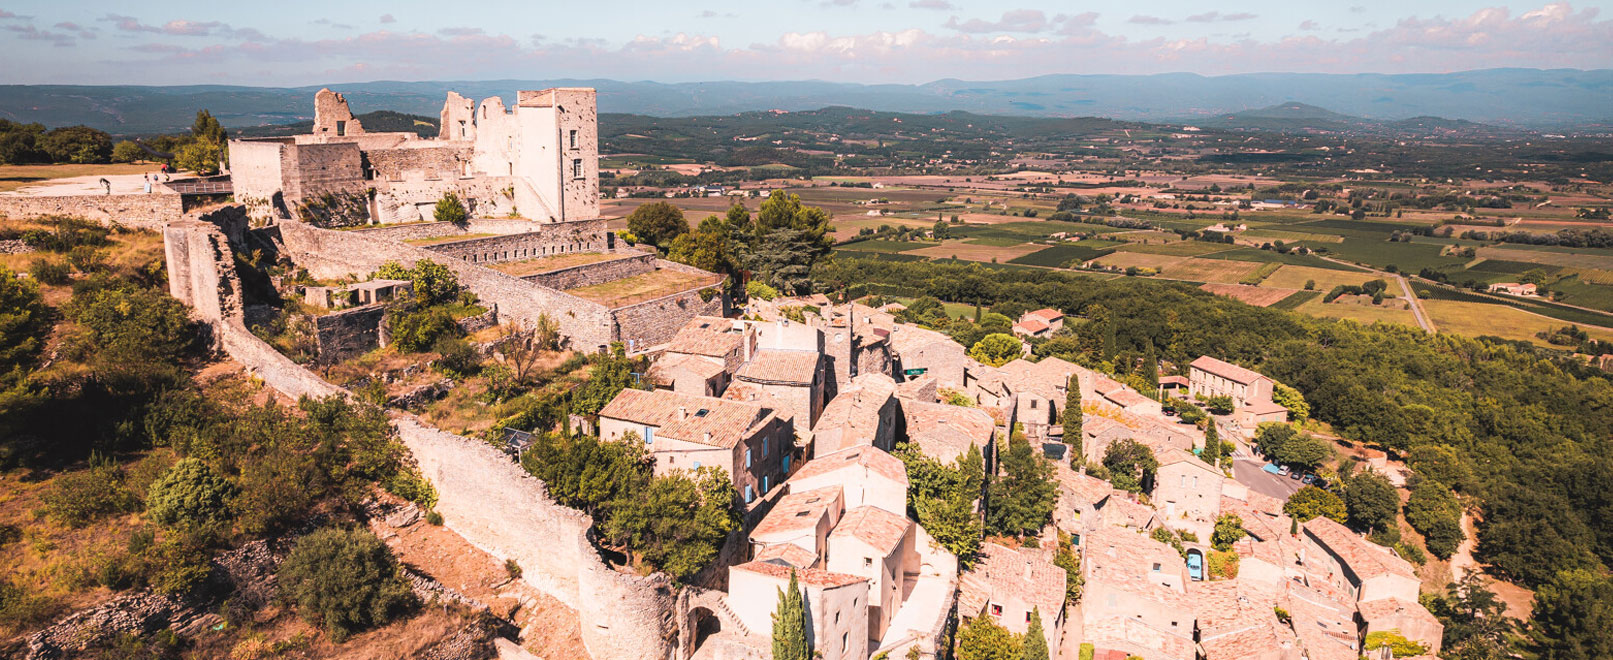 The Luberon castles’ route